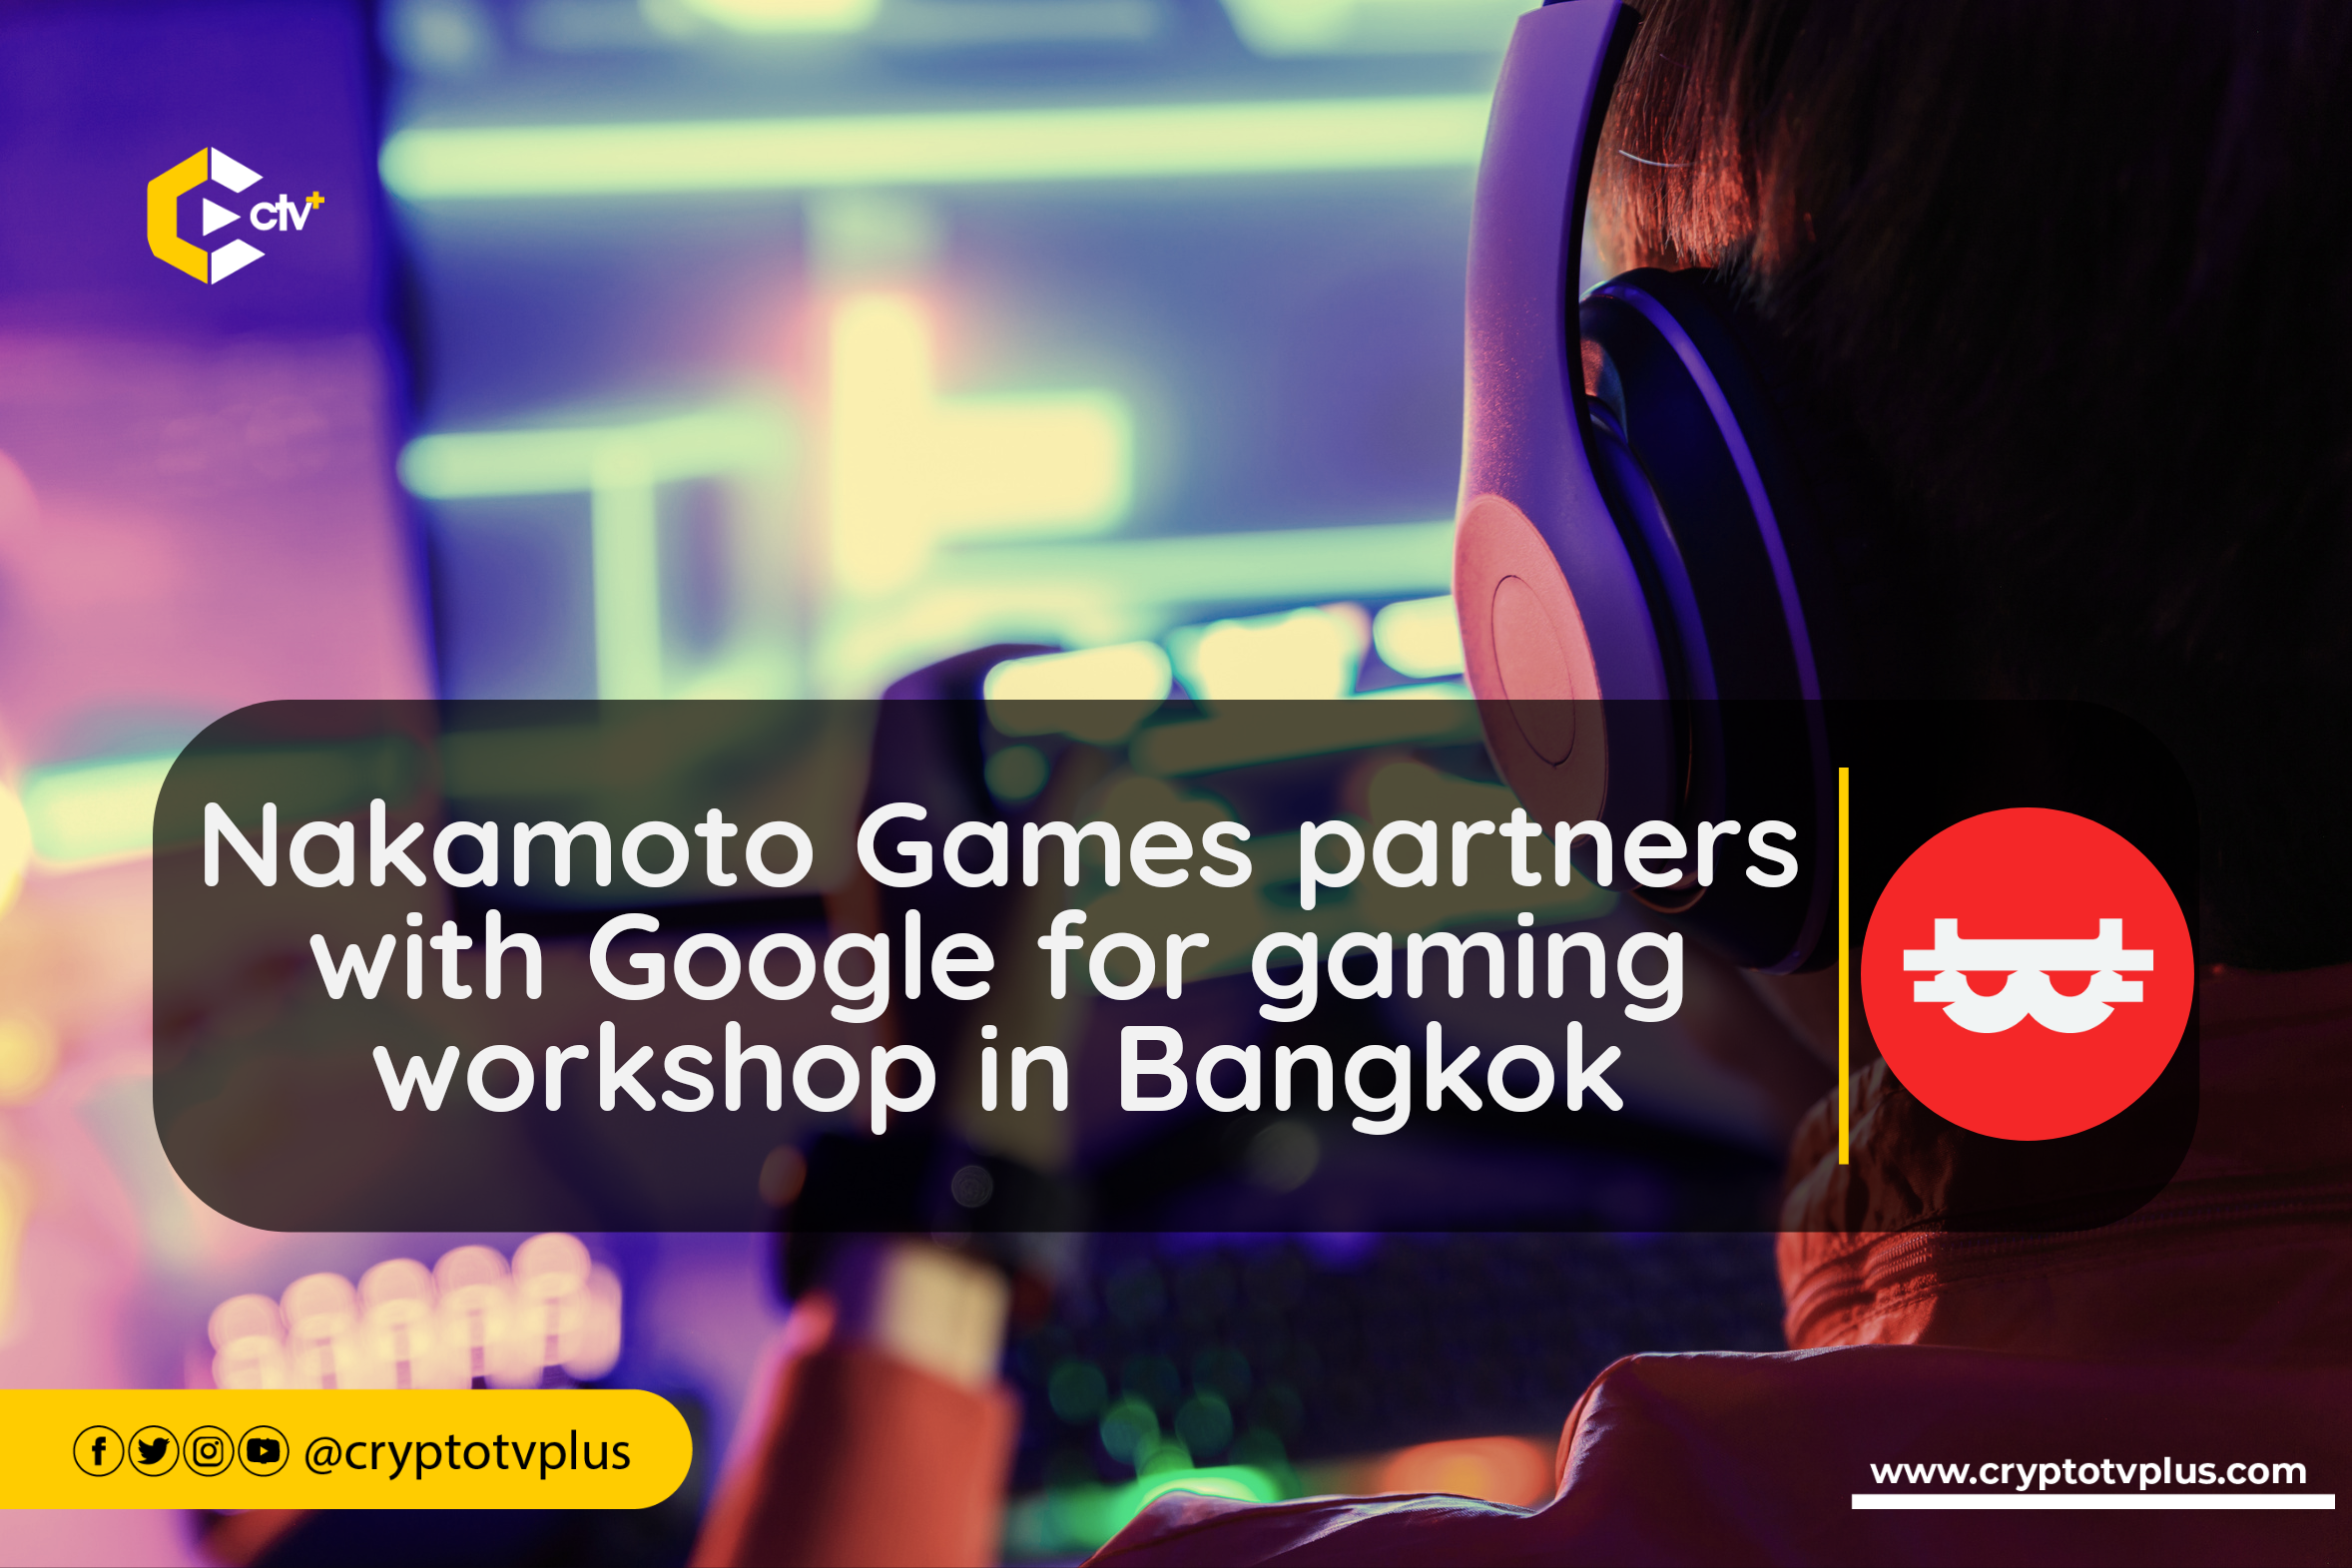 Nakamoto Games partners with Google to host an innovative gaming workshop in Bangkok, to drive creativity & technology in the gaming community.